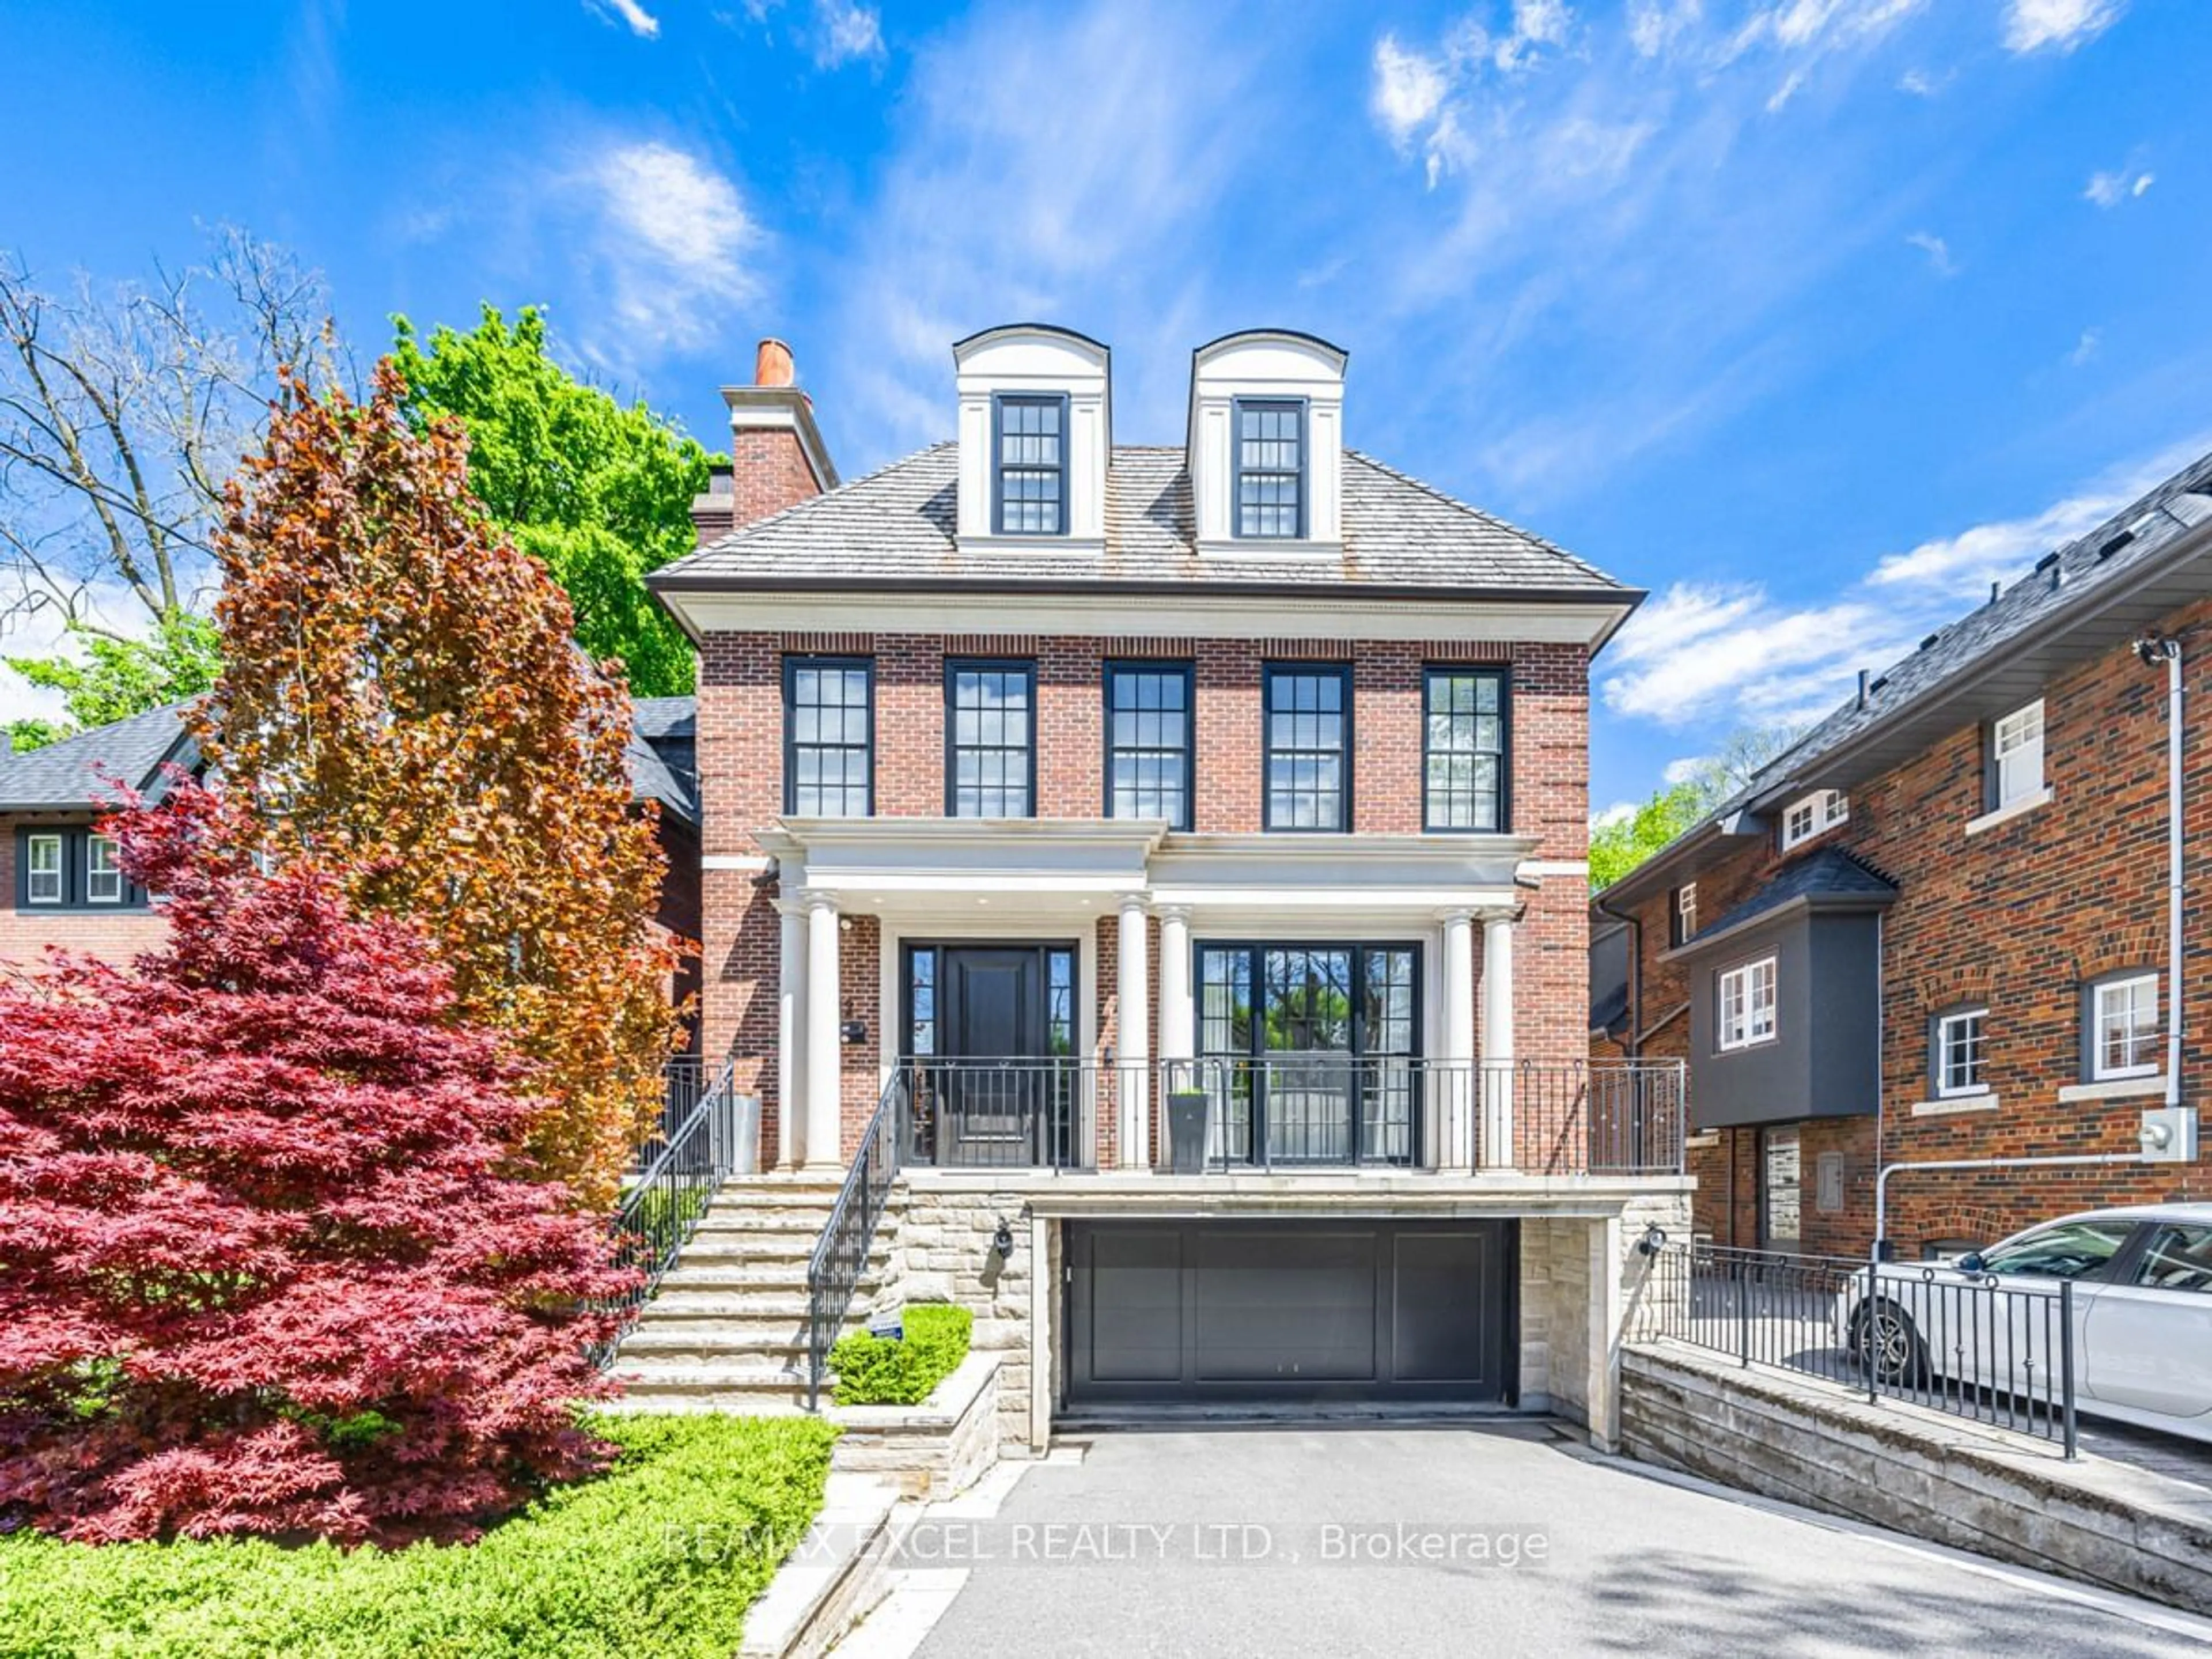 Home with brick exterior material for 22 Delavan Ave, Toronto Ontario M5P 1T3